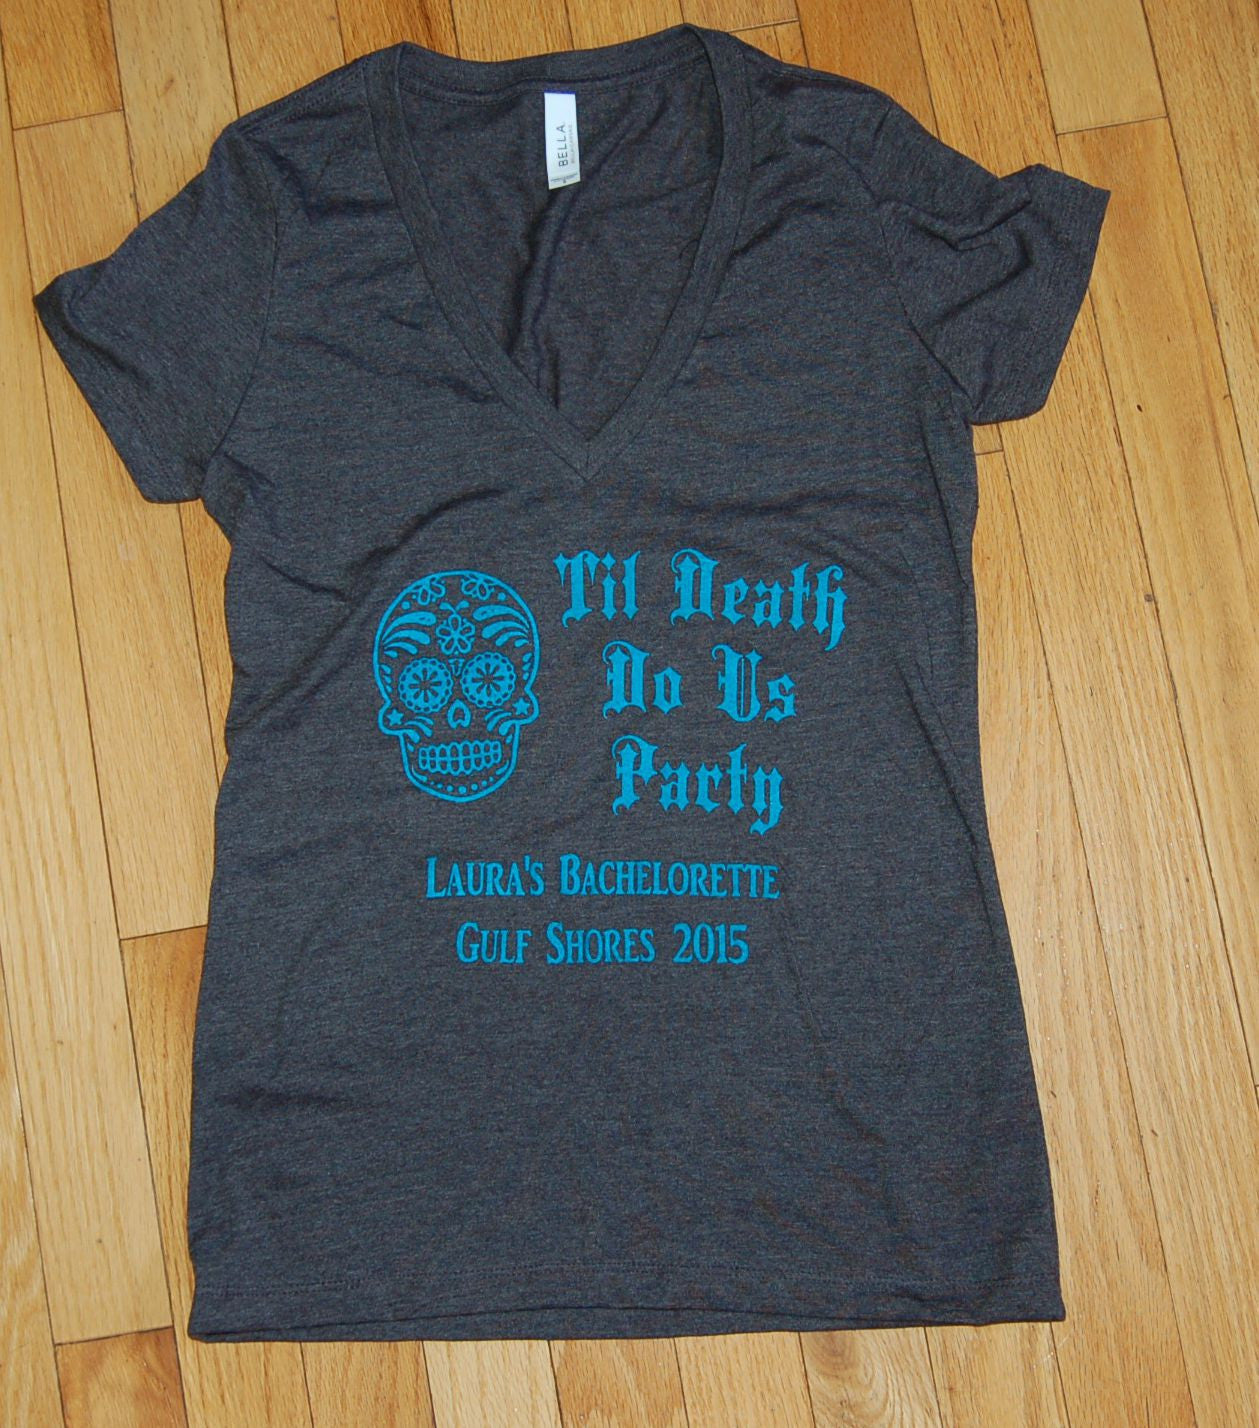 Til' Death Do Us Party Screen Printed Women's Fitted V Neck Tee Shirts - Be Vocal Designs